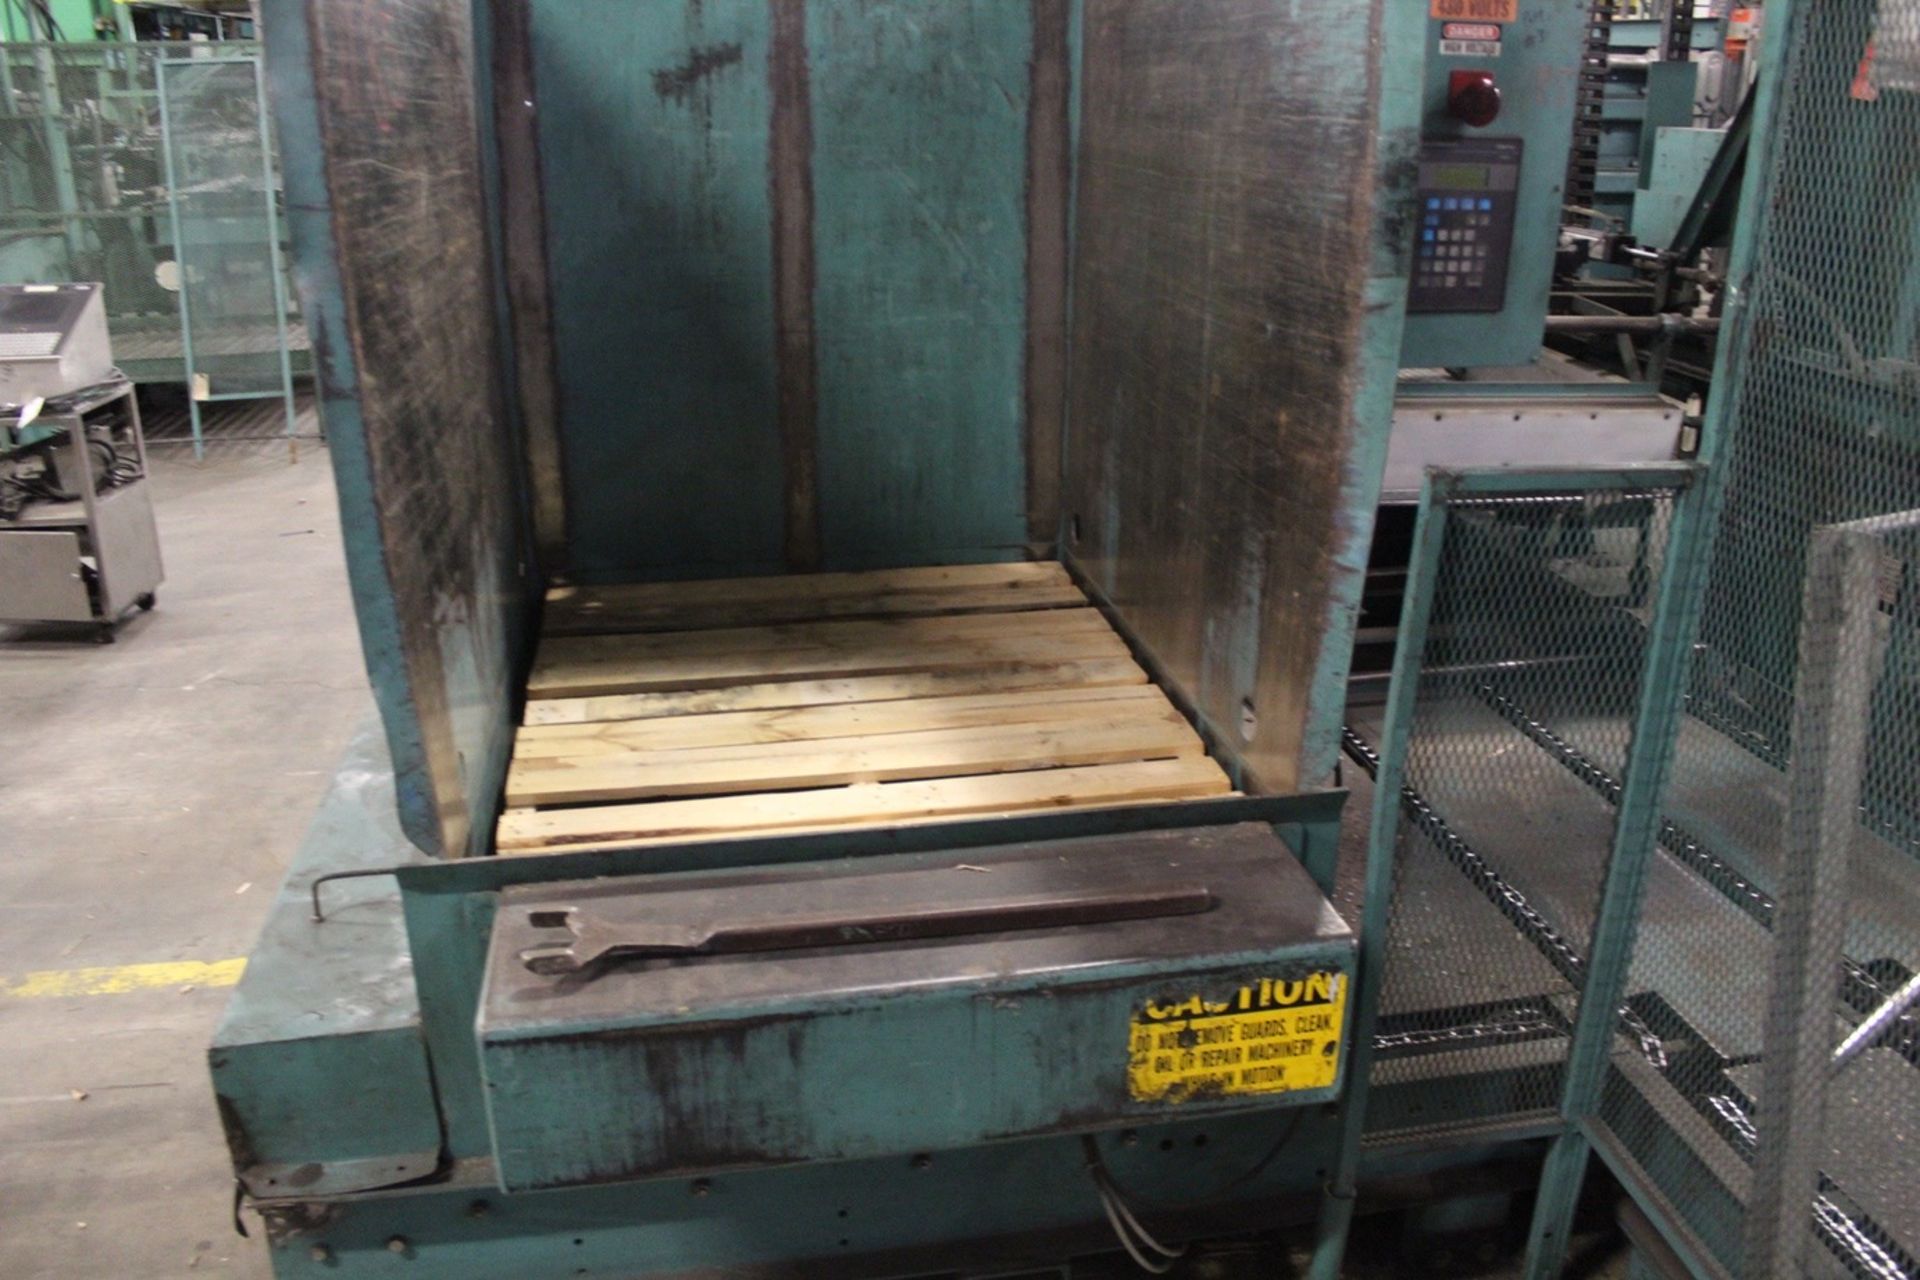 Whallon Machinery Automatic Pallet Stacker, 42" X 48" Pallets | Rigging: $2100 - Image 3 of 8